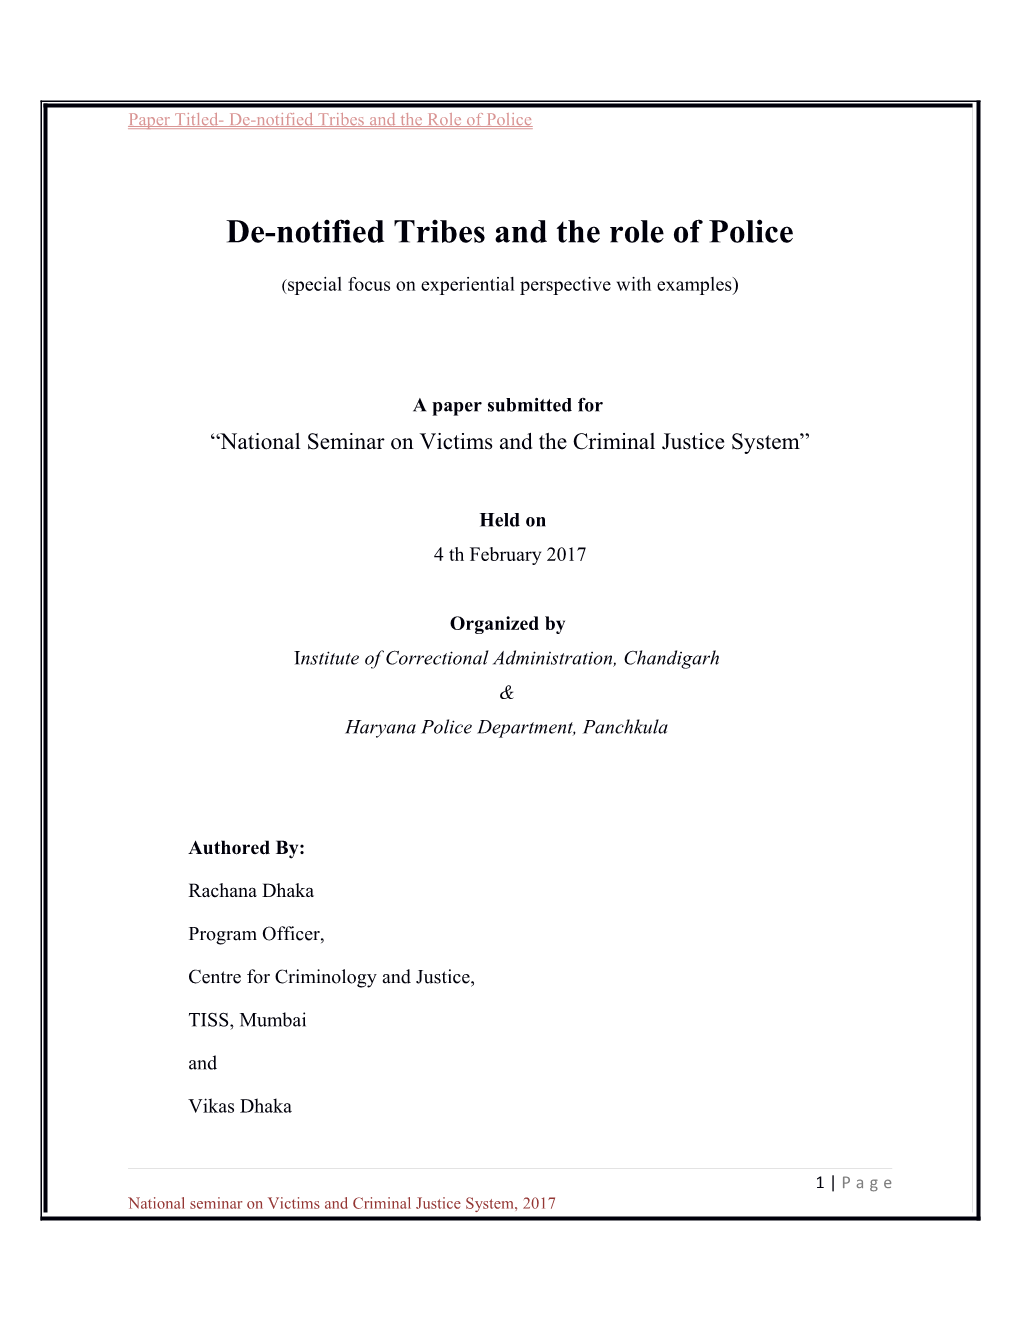 De-Notified Tribes and the Role of Police